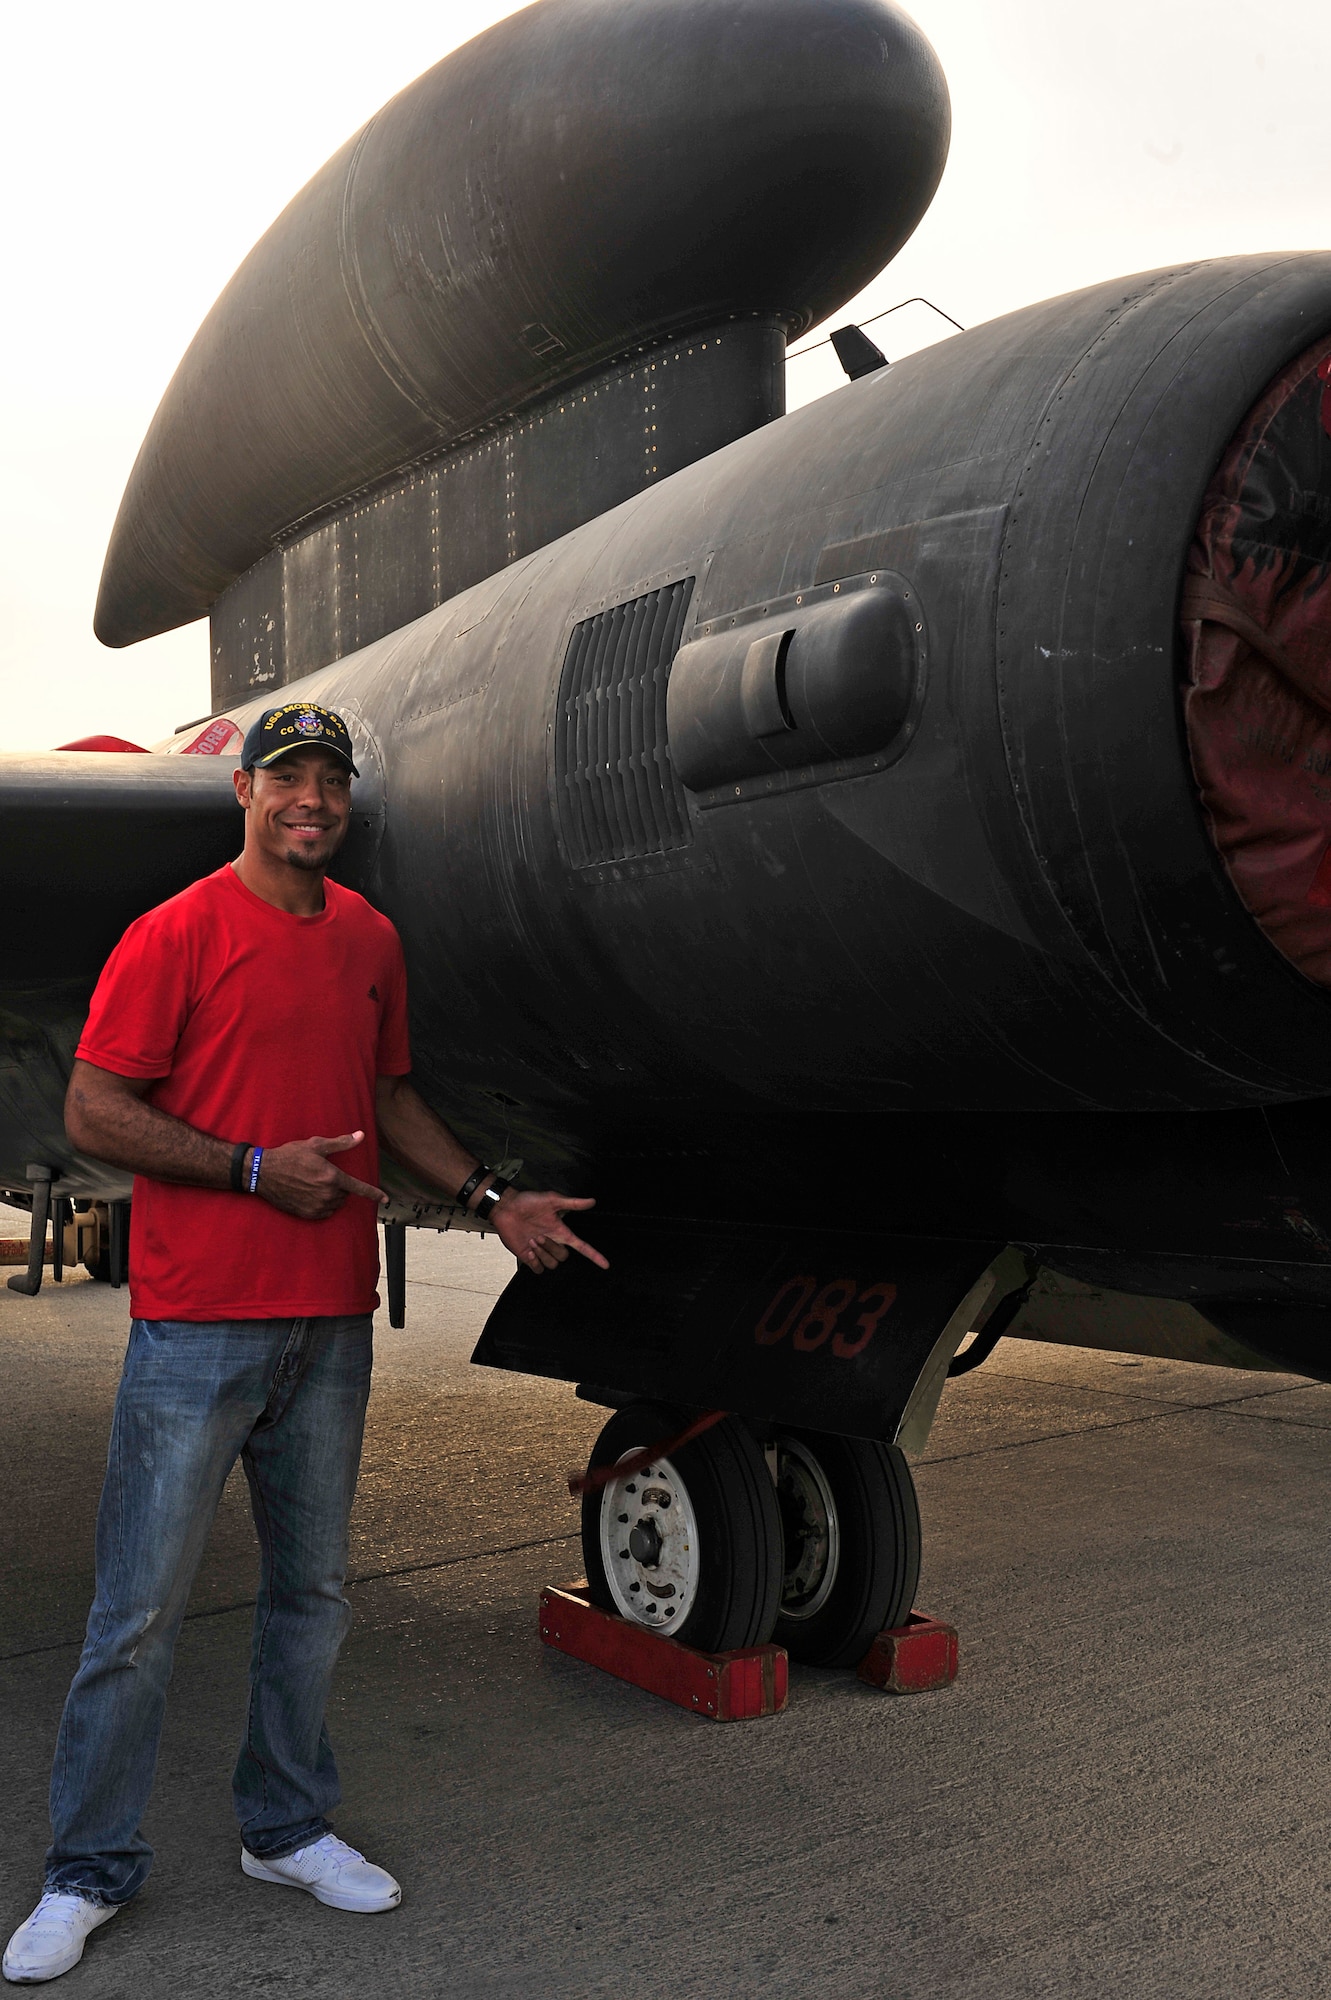 Tampa Bay Buccaneers Pro Bowl Receiver Vincent Jackson poses with a U-2 adorned with his number, 83, at an undisclosed location in Southwest Asia Feb. 28, 2013. Jackson visited the men and women of the 380th Air Expeditionary Wing to express the country’s gratitude for their service and sacrifice during the Vice Chairman of the Joint Chiefs of Staff Adm. James A. Winnefeld USO tour. (U.S. Air Force photo by Tech. Sgt. Christina M. Styer/Released)